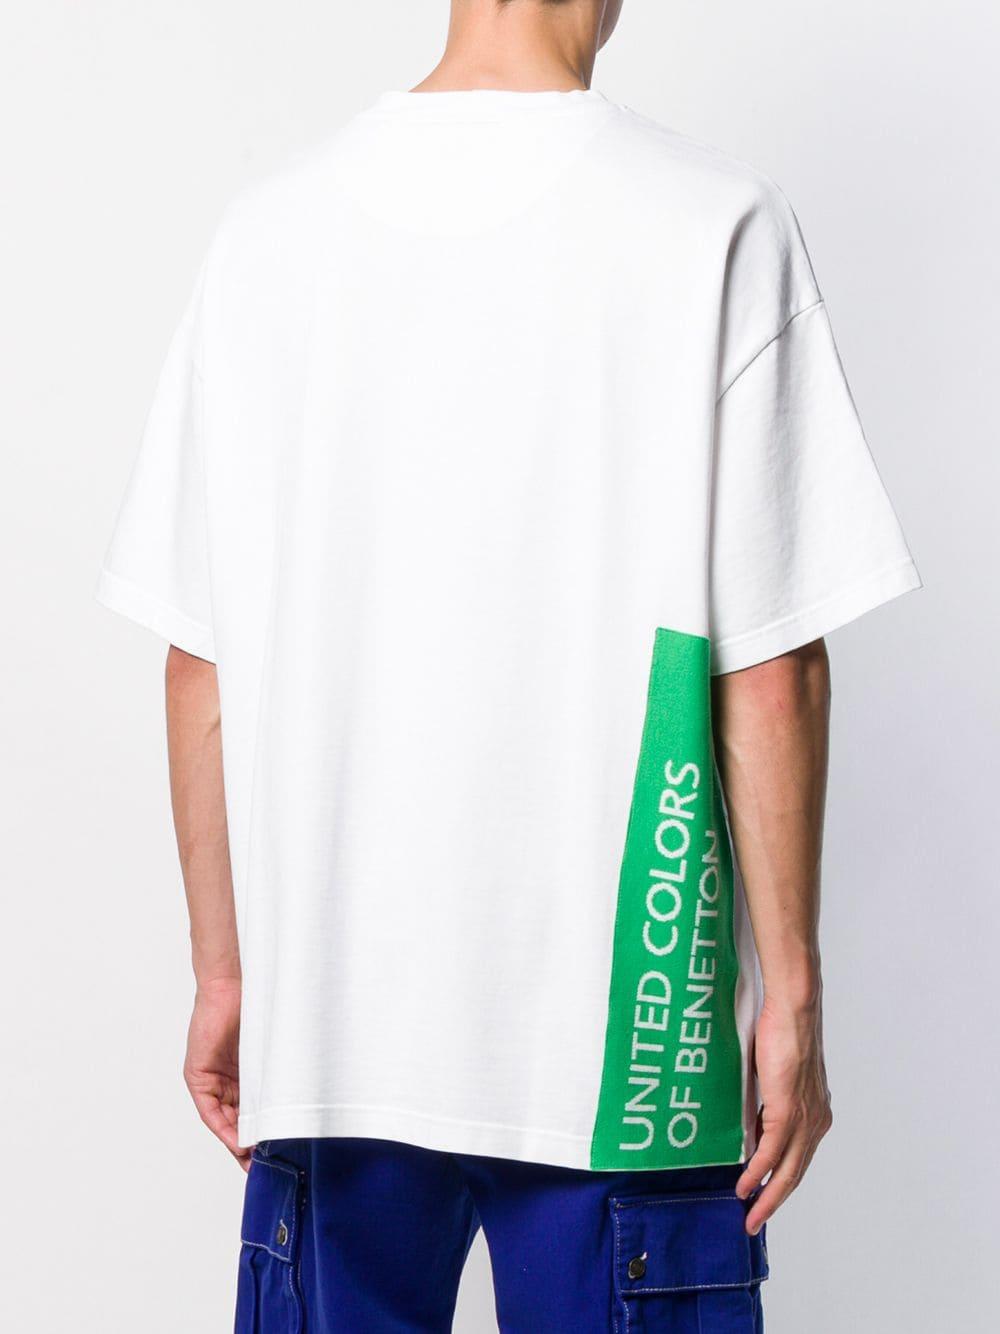 T Shirt Benetton Top Sellers, 51% OFF | www.chine-magazine.com